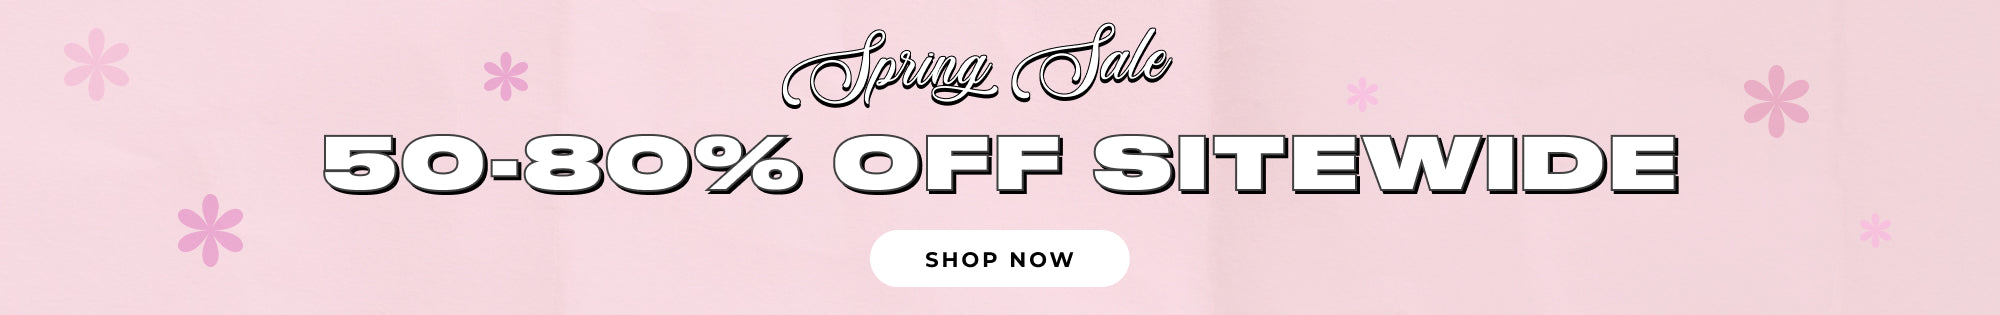 spring sale 50-80% off sitewide shop now